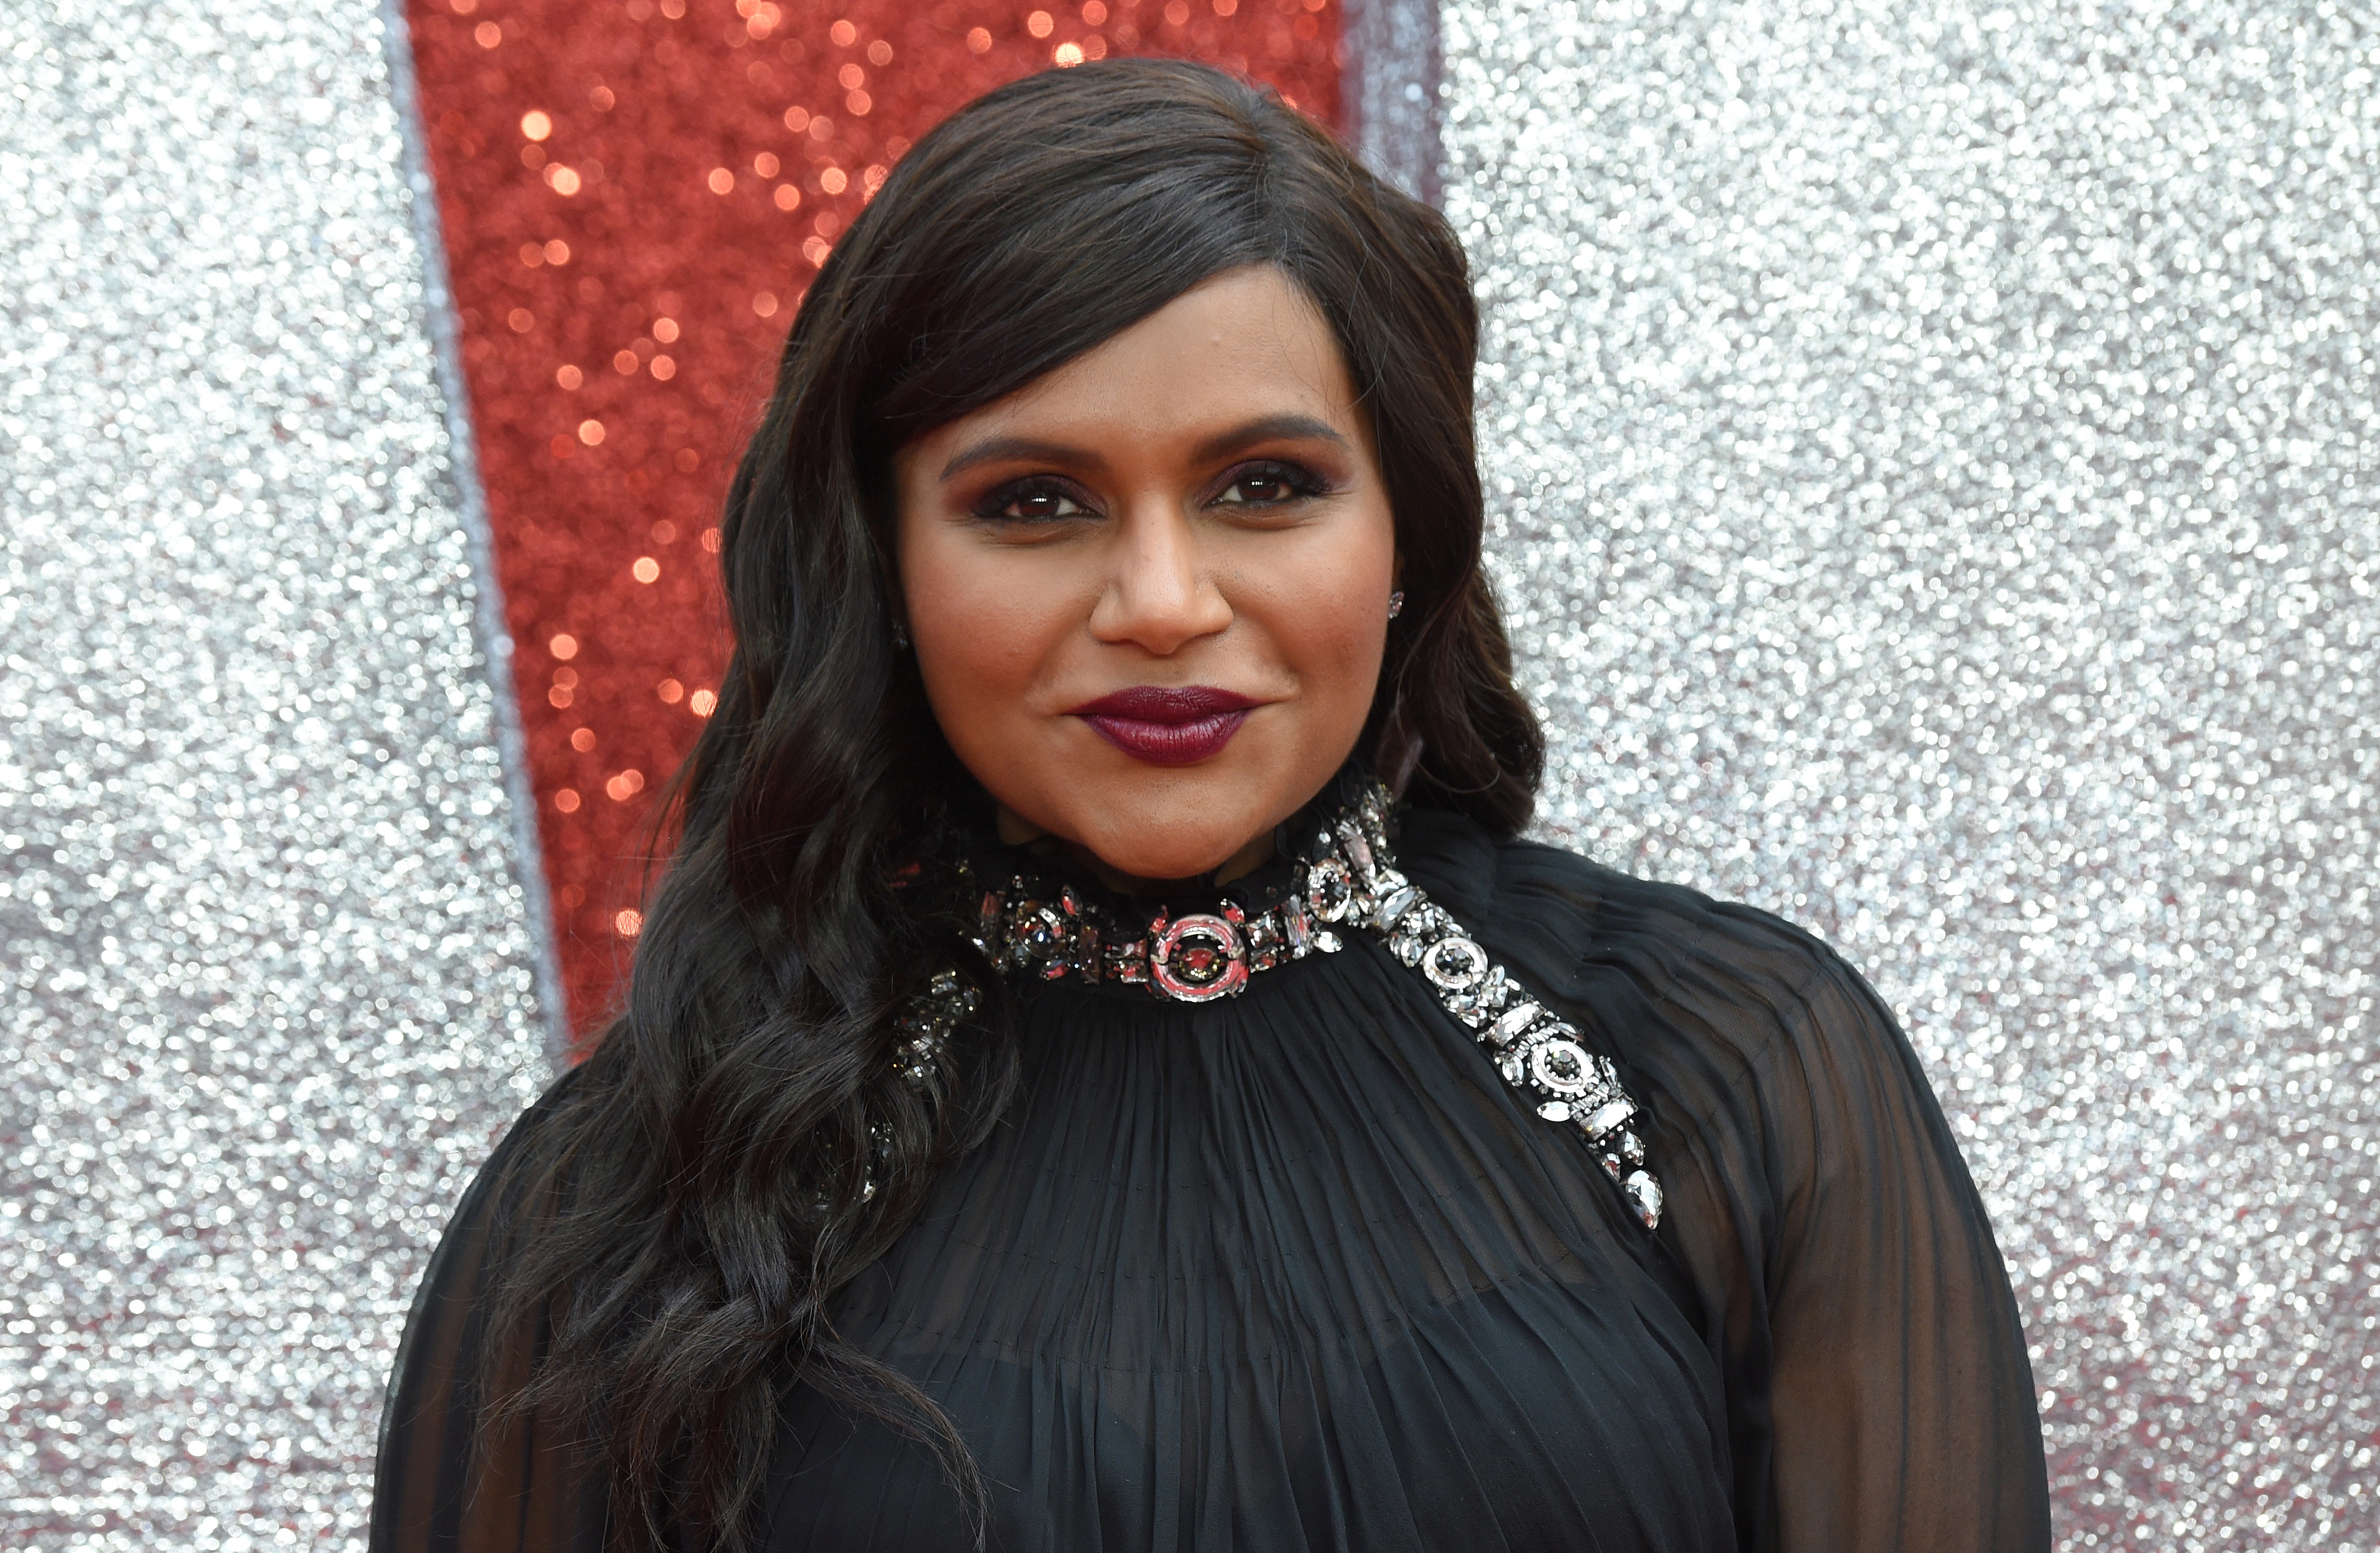 Mindy Kaling at the European premiere of the film "Ocean's 8" in London on June 13, 2018. (Anthony Harvey—AFP/Getty Images)